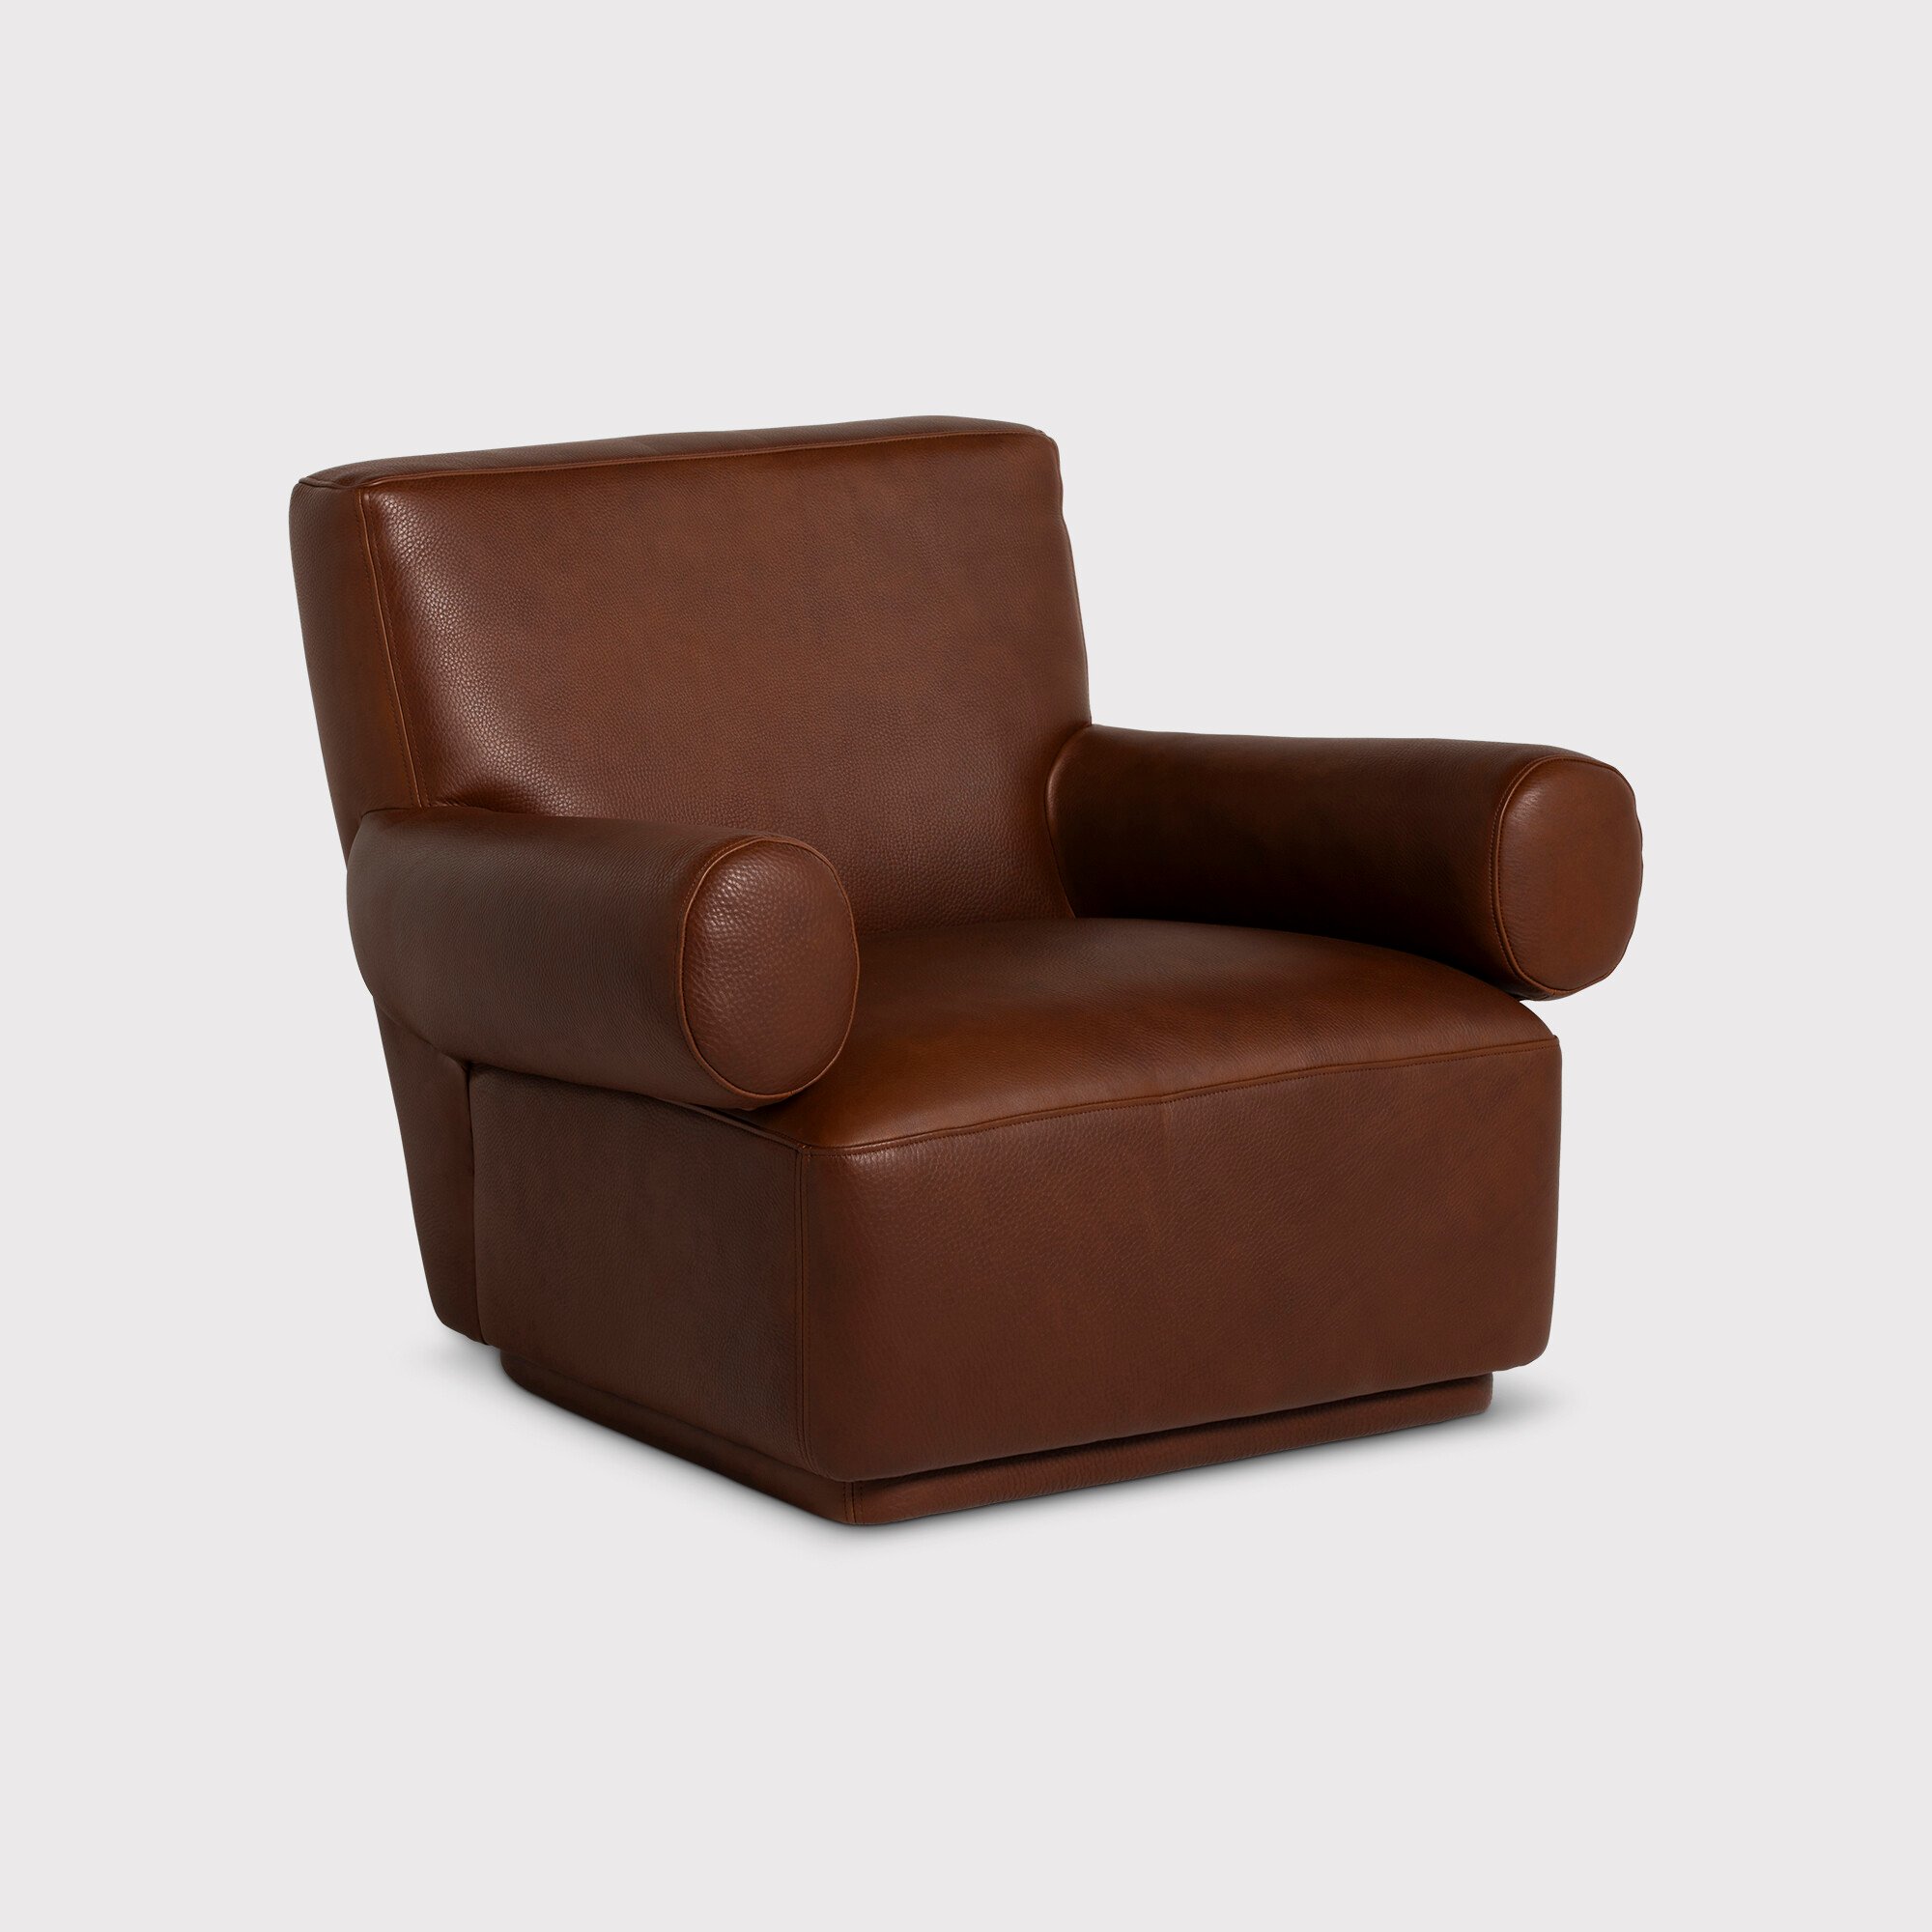 Chance Swivel Armchair, Brown Leather | Barker & Stonehouse